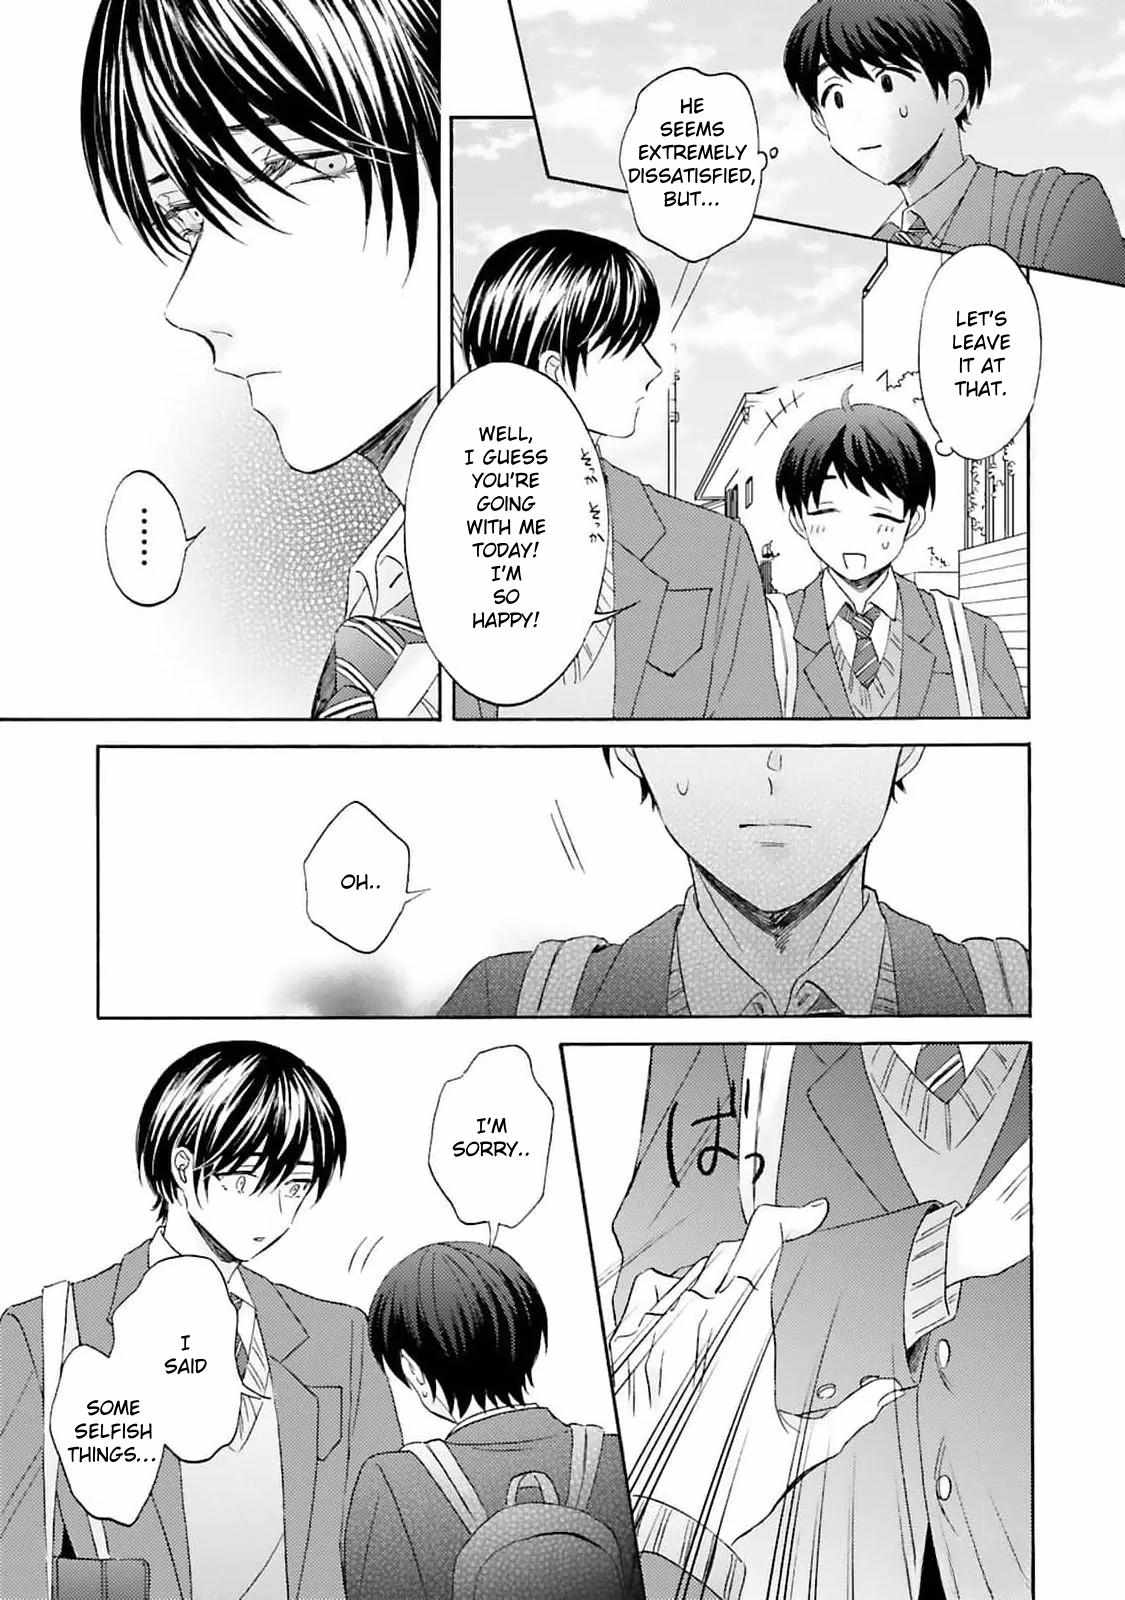 My Cutie Pie -An Ordinary Boy And His Gorgeous Childhood Friend- 〘Official〙 - 5 page 11-43c0c71b